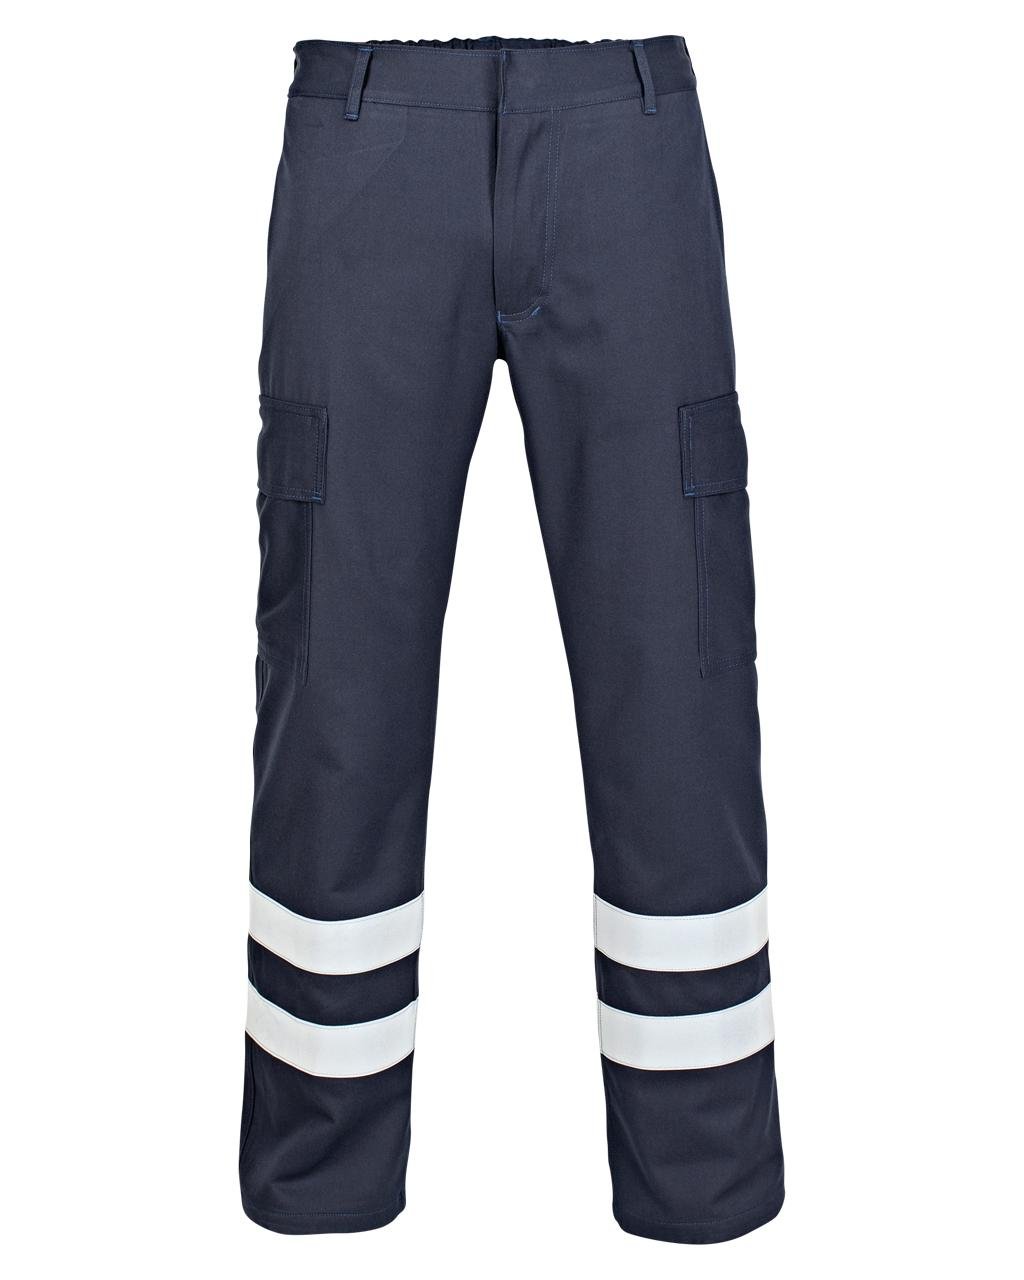 Trousers MultiStop with Fr Reflective Tape